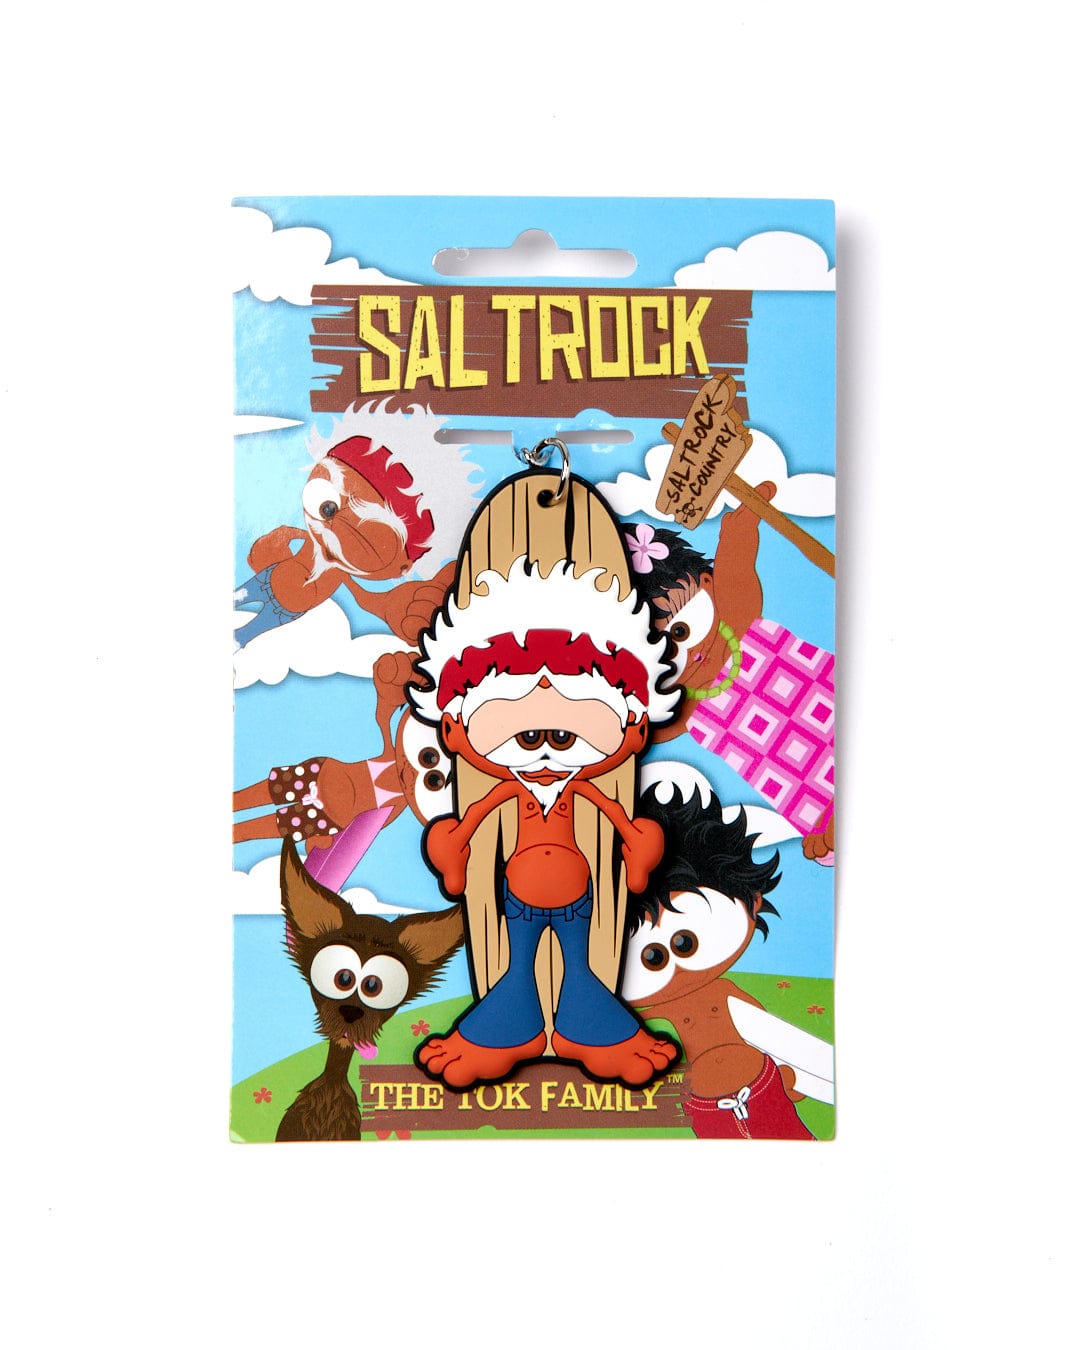 A package with an image of a Saltrock Woodstock Keyring character.